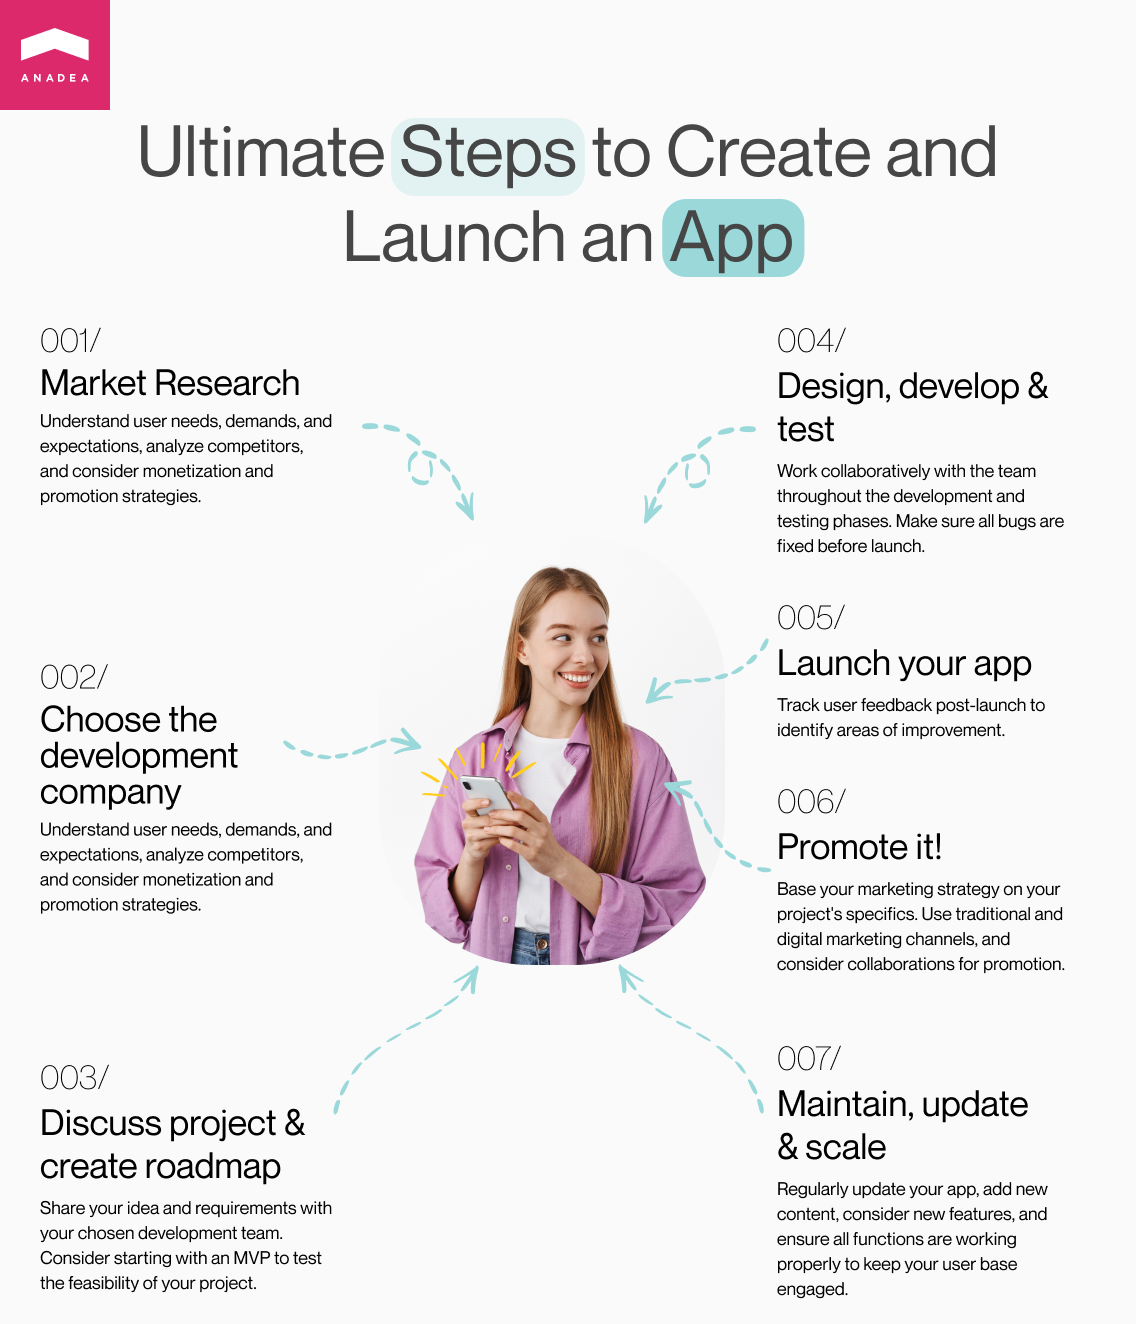 How to develop and launch an app - step-by-step infographic